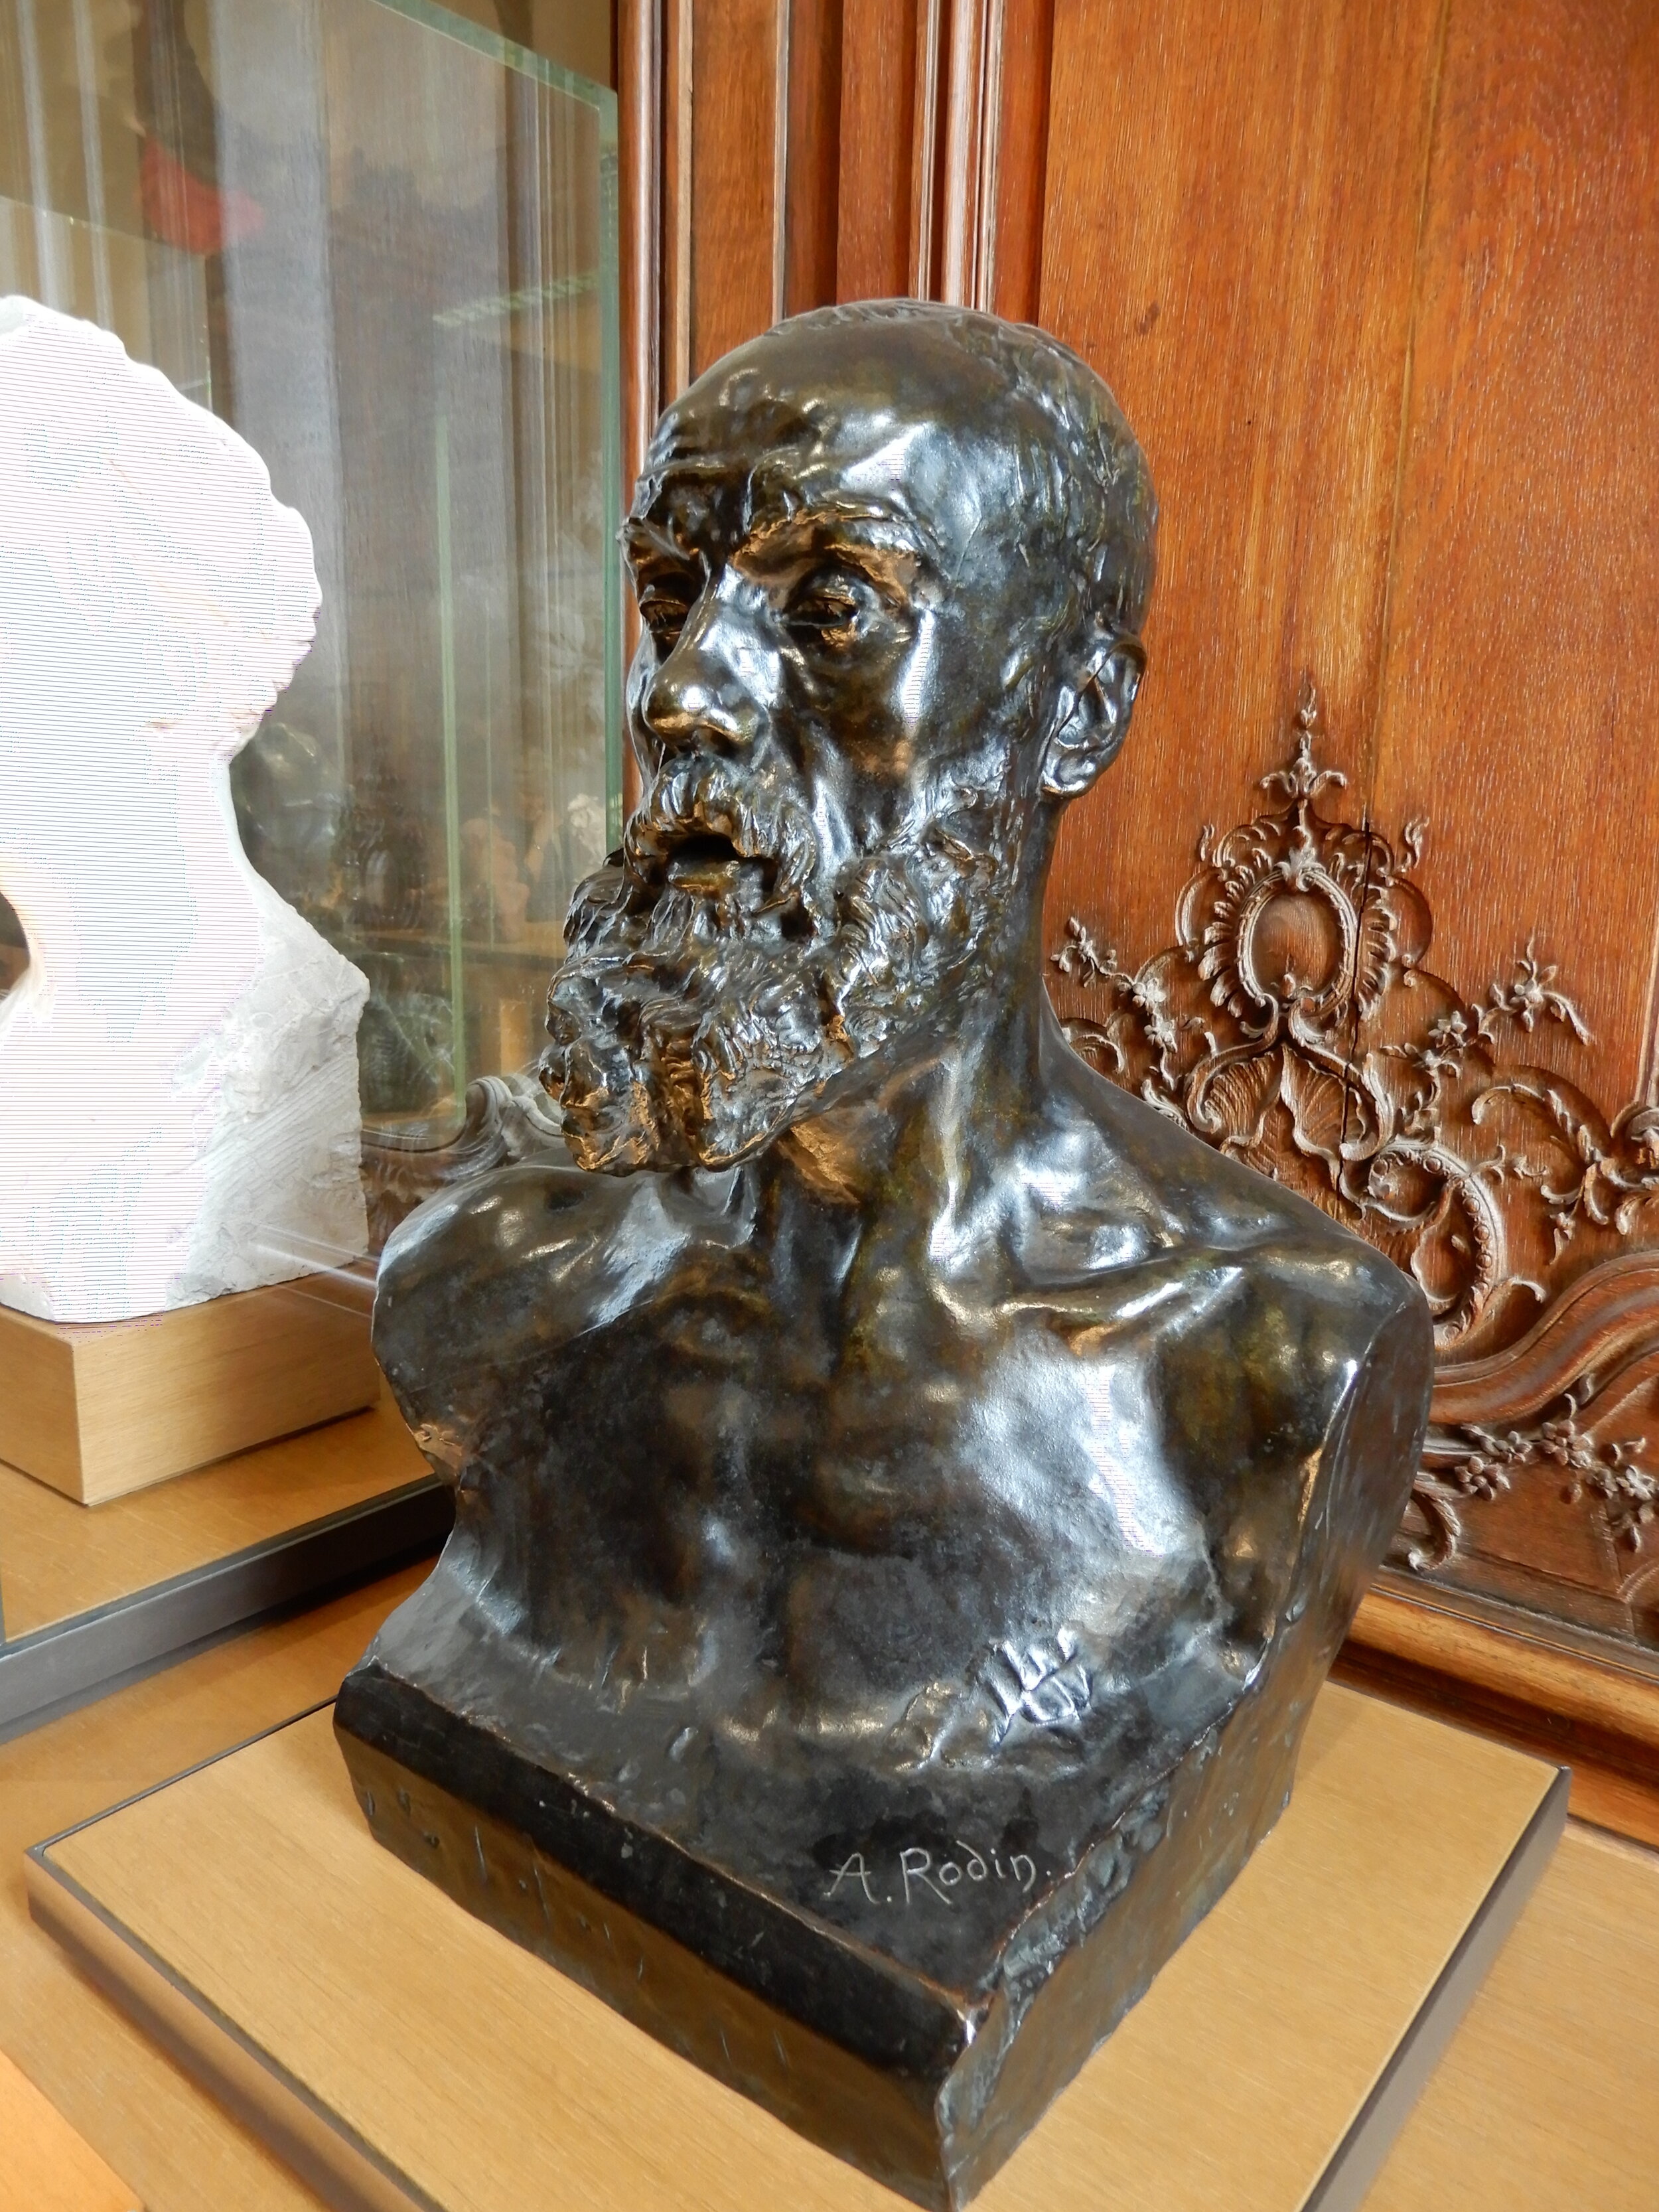 One of many busts